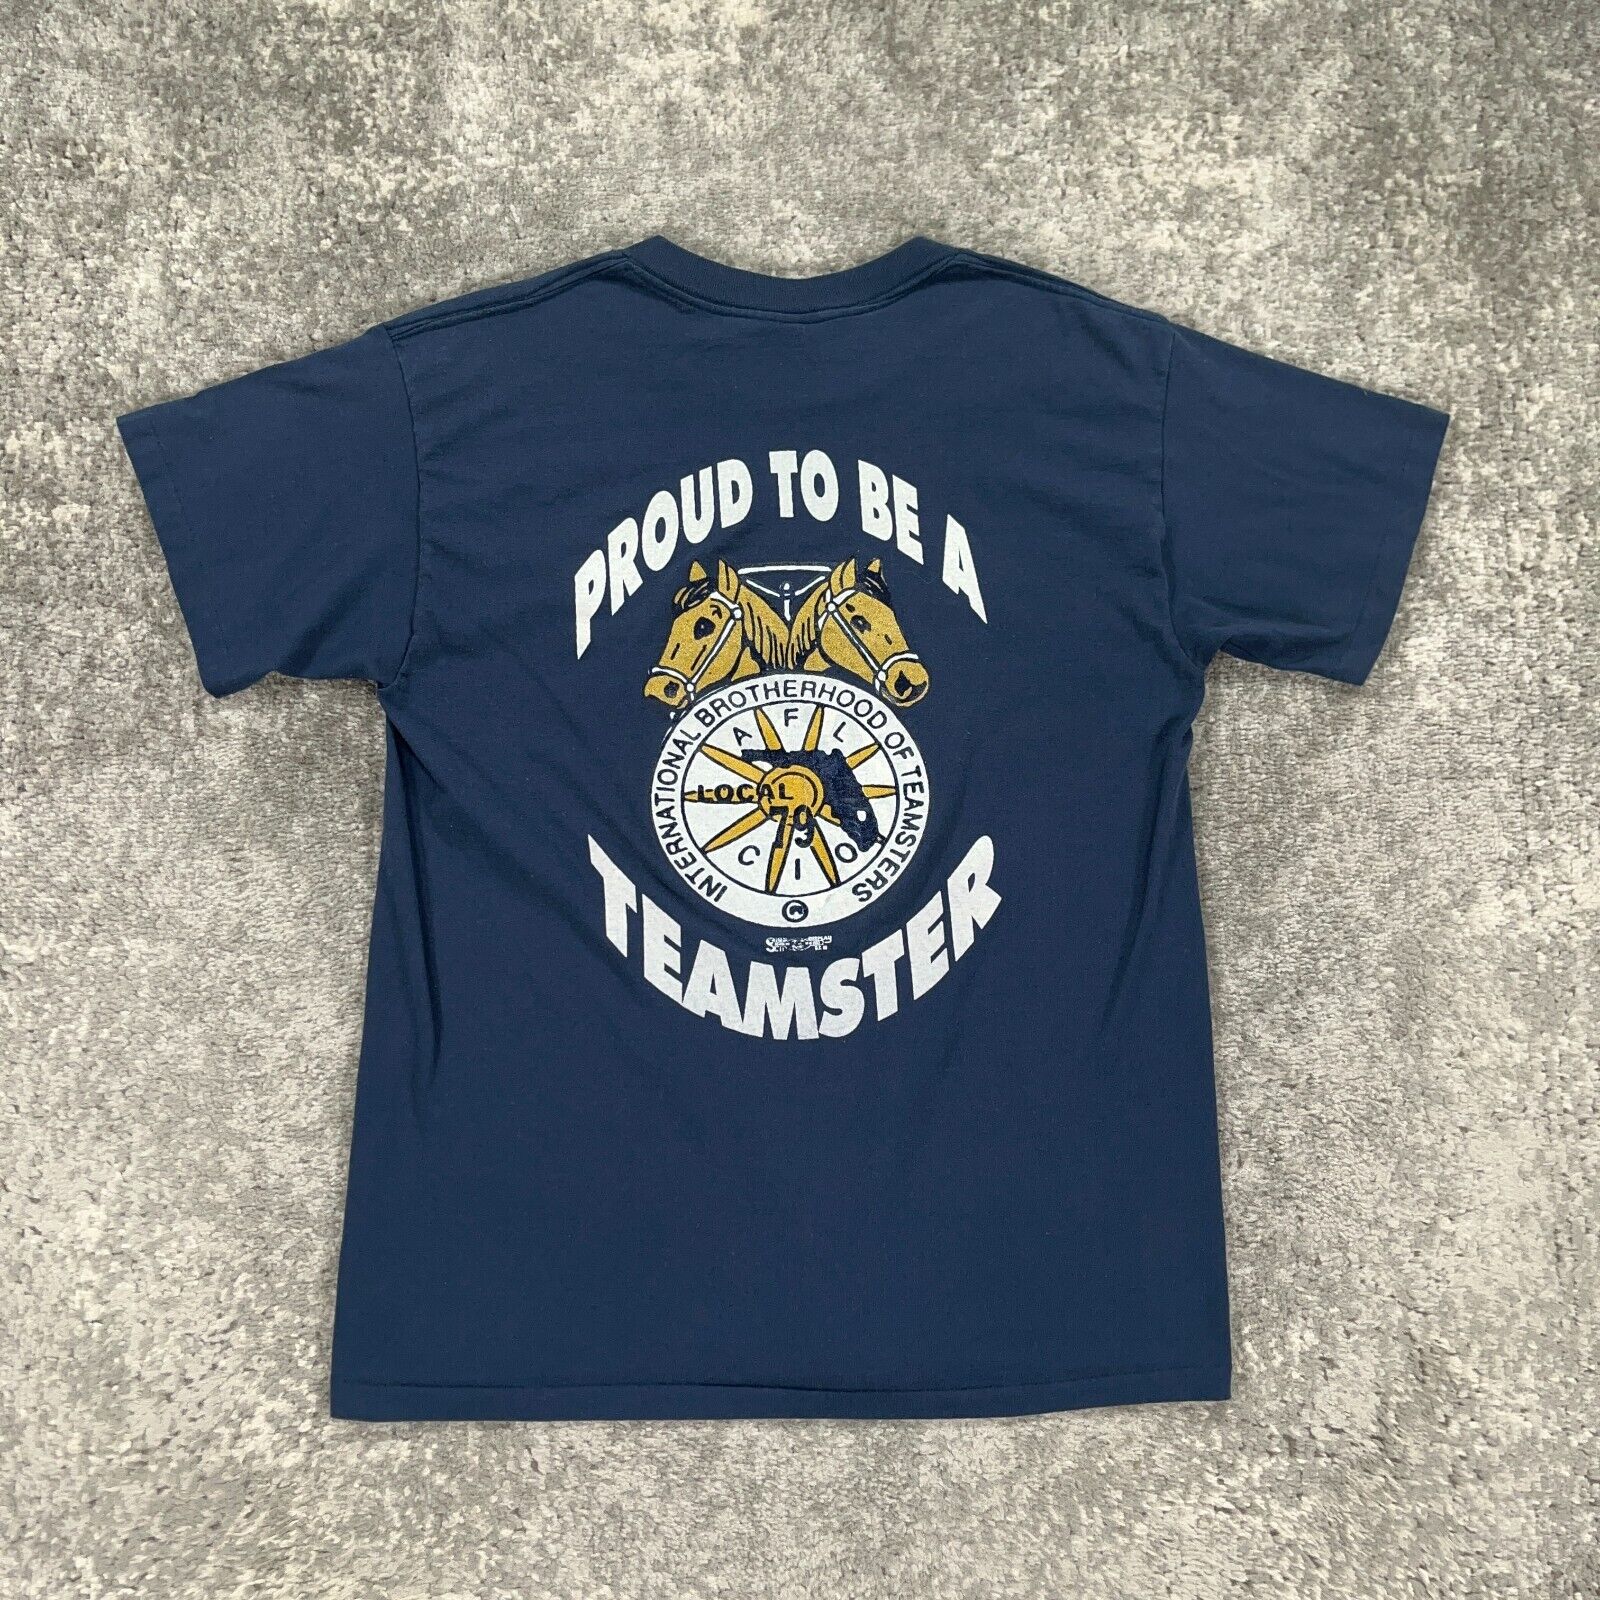 VTG Teamsters Shirt Mens Large Blue Spellout Logo Made In USA 90s Single Stitch